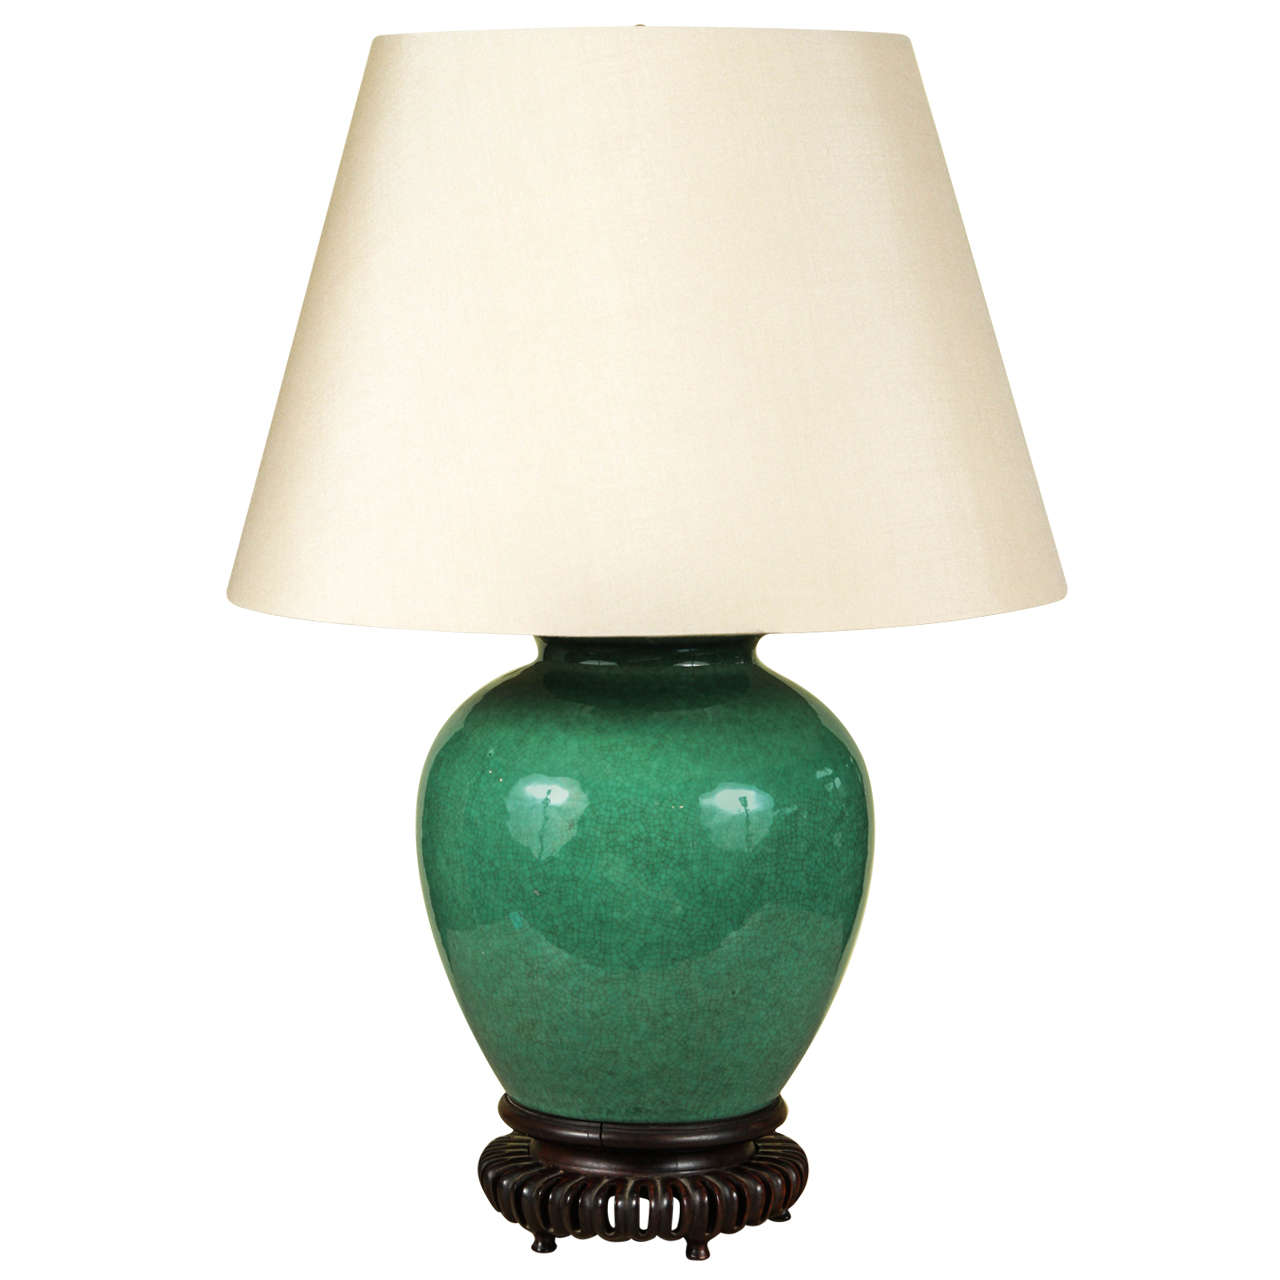 Chinese Green Crackle Glazed Jar Mounted as a Lamp, circa 1840